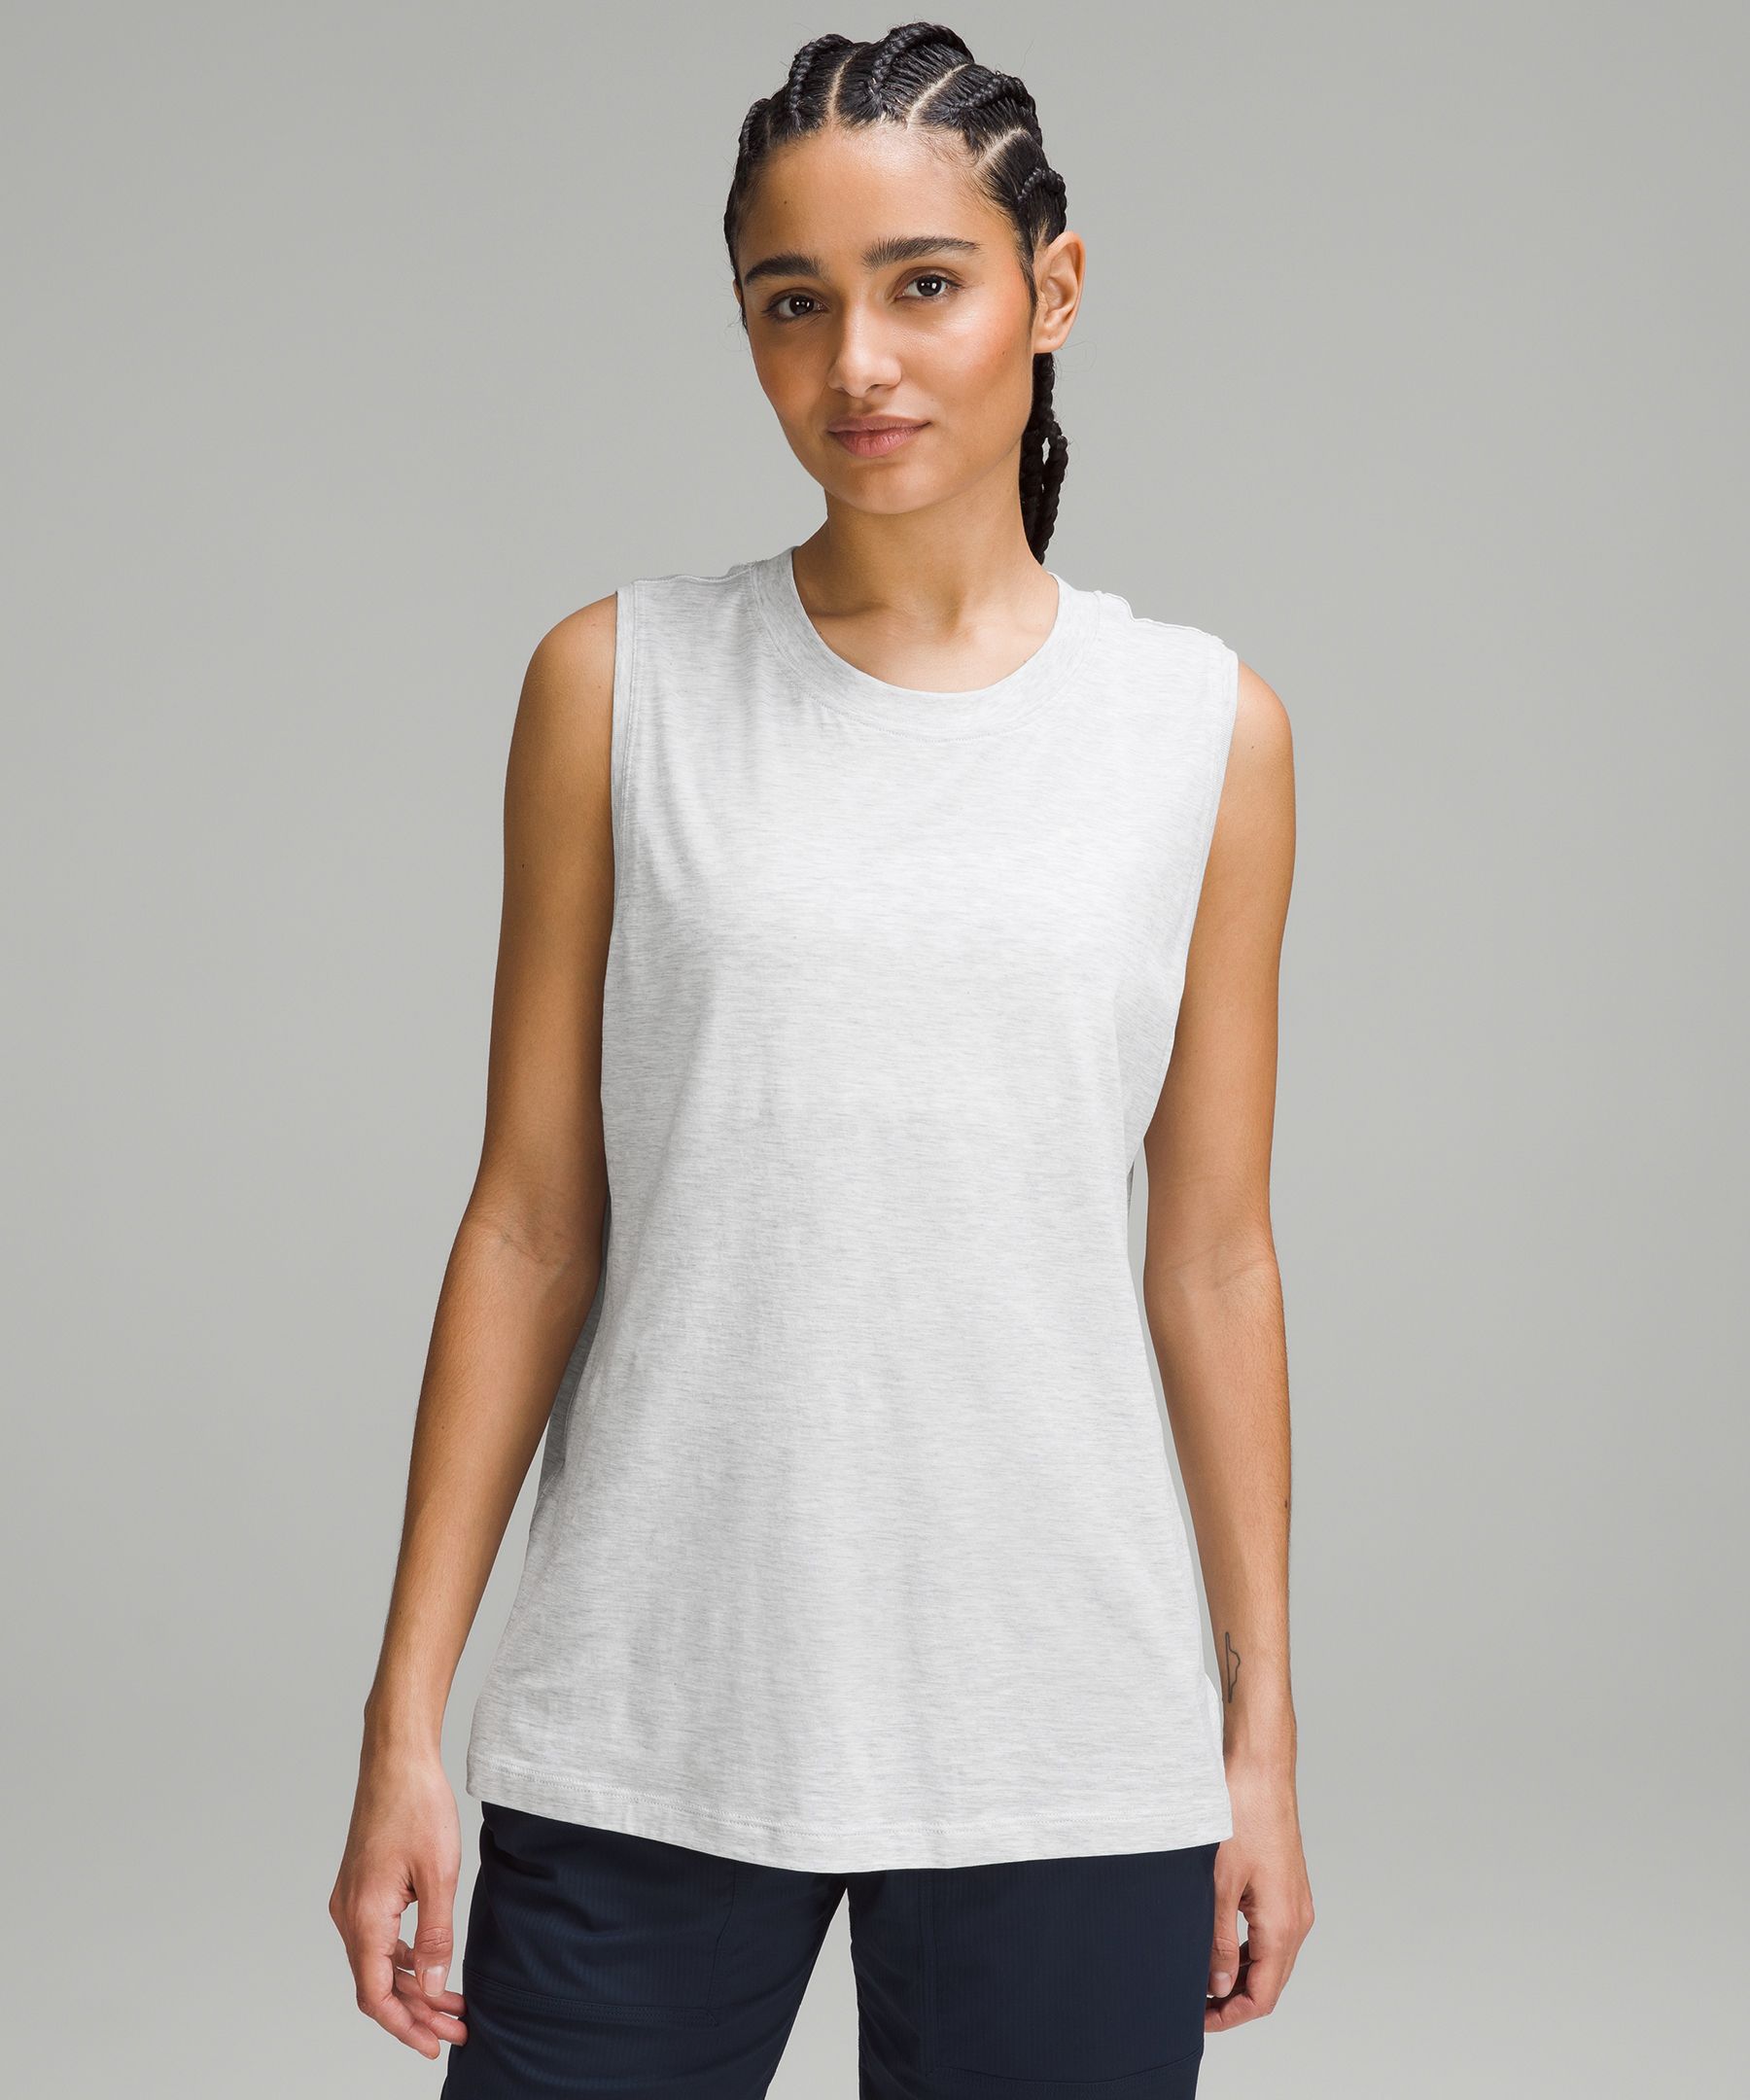 Lululemon All Yours Tank Top